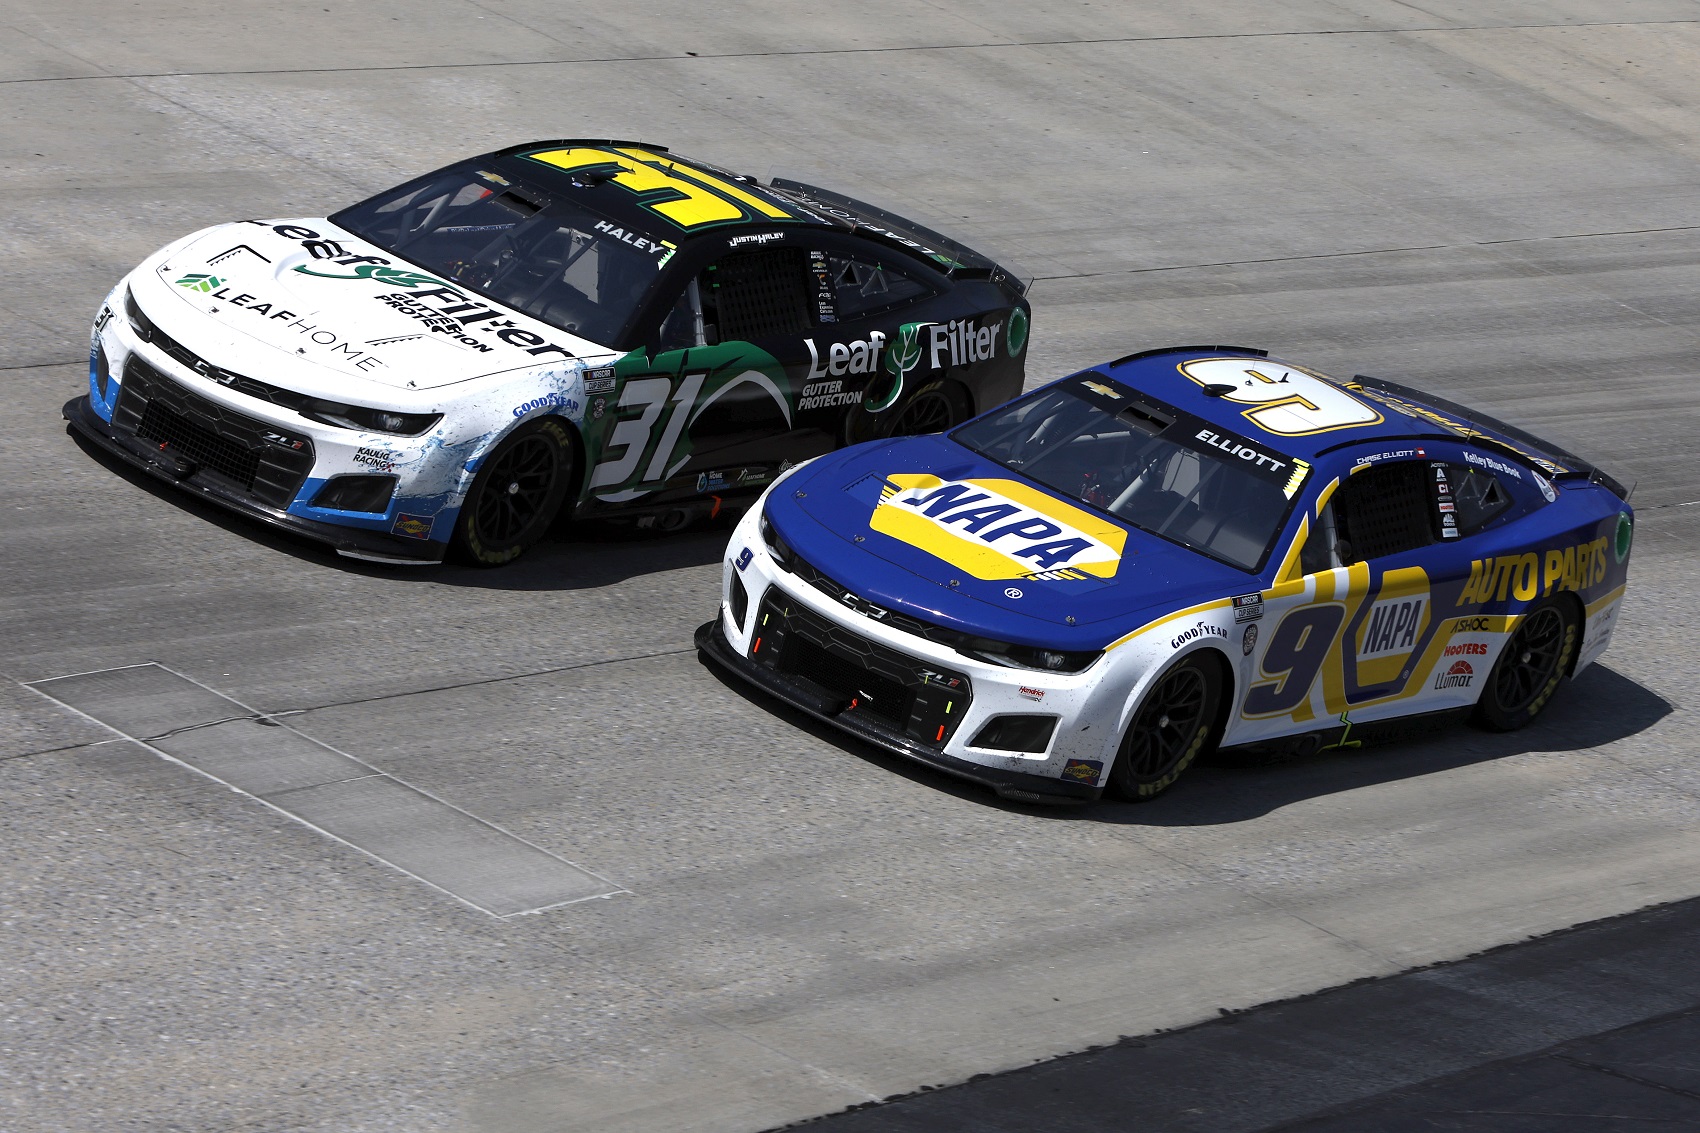 DOVER, DELAWARE - MAY 02: Chase Elliott, driver of the #9 NAPA Auto Parts Chevrolet, and Justin Haley, driver of the #31 LeafFilter Gutter Protection Chevrolet, race during the NASCAR Cup Series DuraMAX Drydene 400 presented by RelaDyne at Dover Motor Speedway on May 02, 2022 in Dover, Delaware